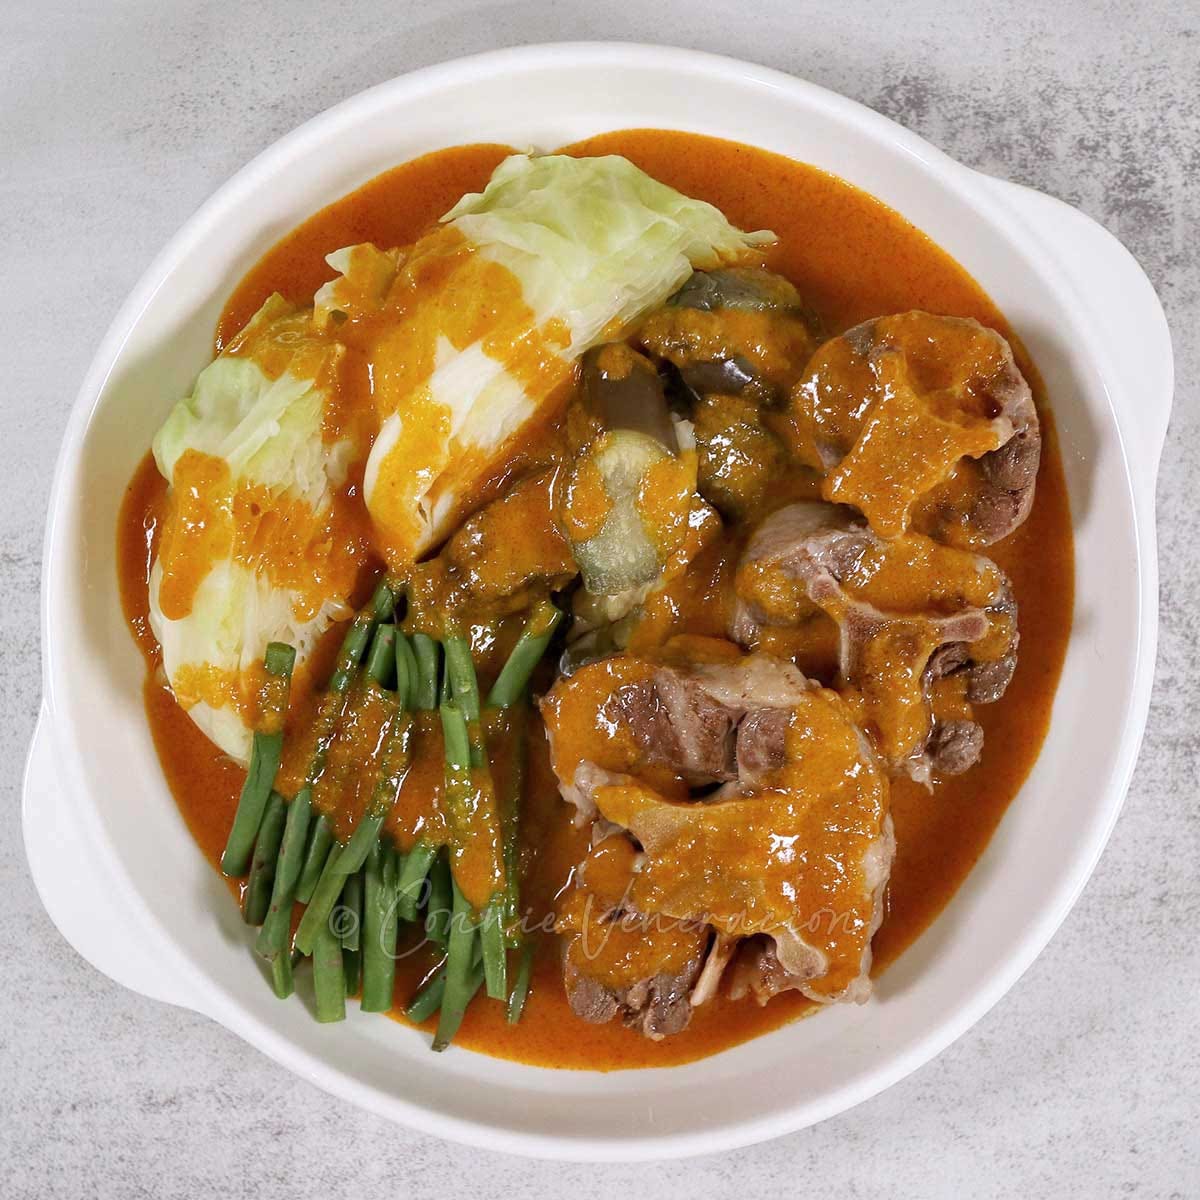 Kare-kare (oxtail and vegetables in peanut sauce)